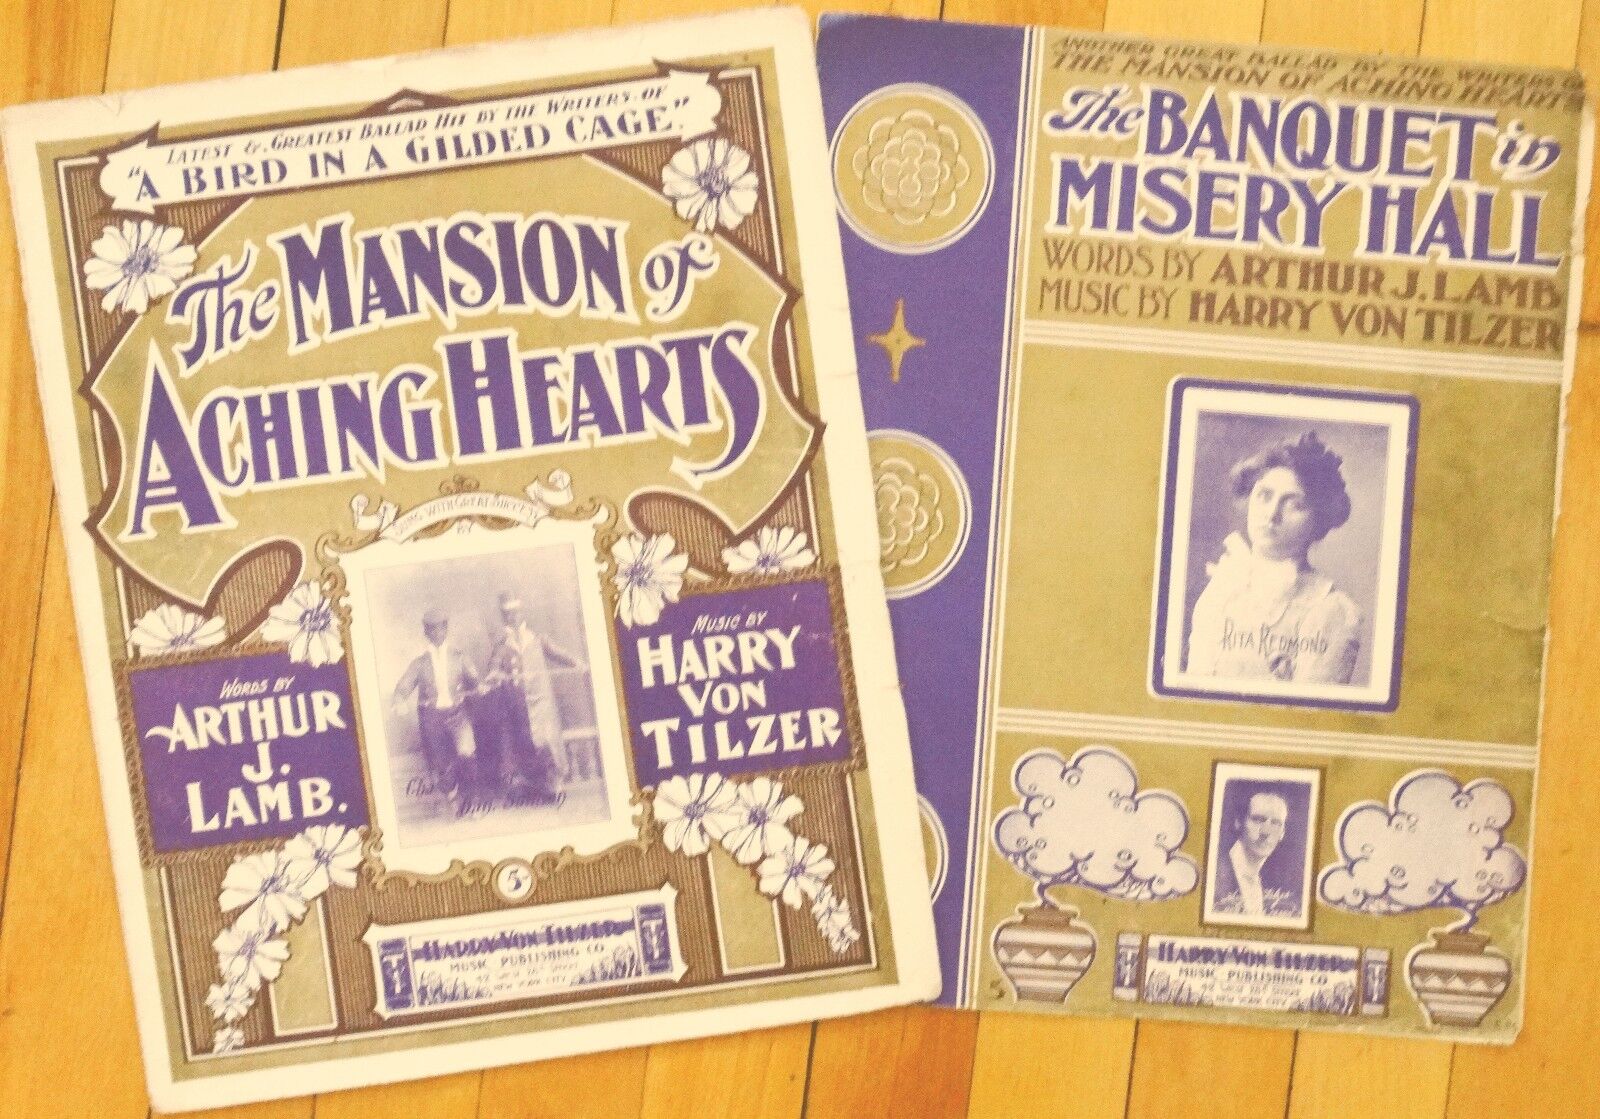 Two sad songs -- Mansion of Aching Hearts, Banquet in Misery Hall vtg Music 1902